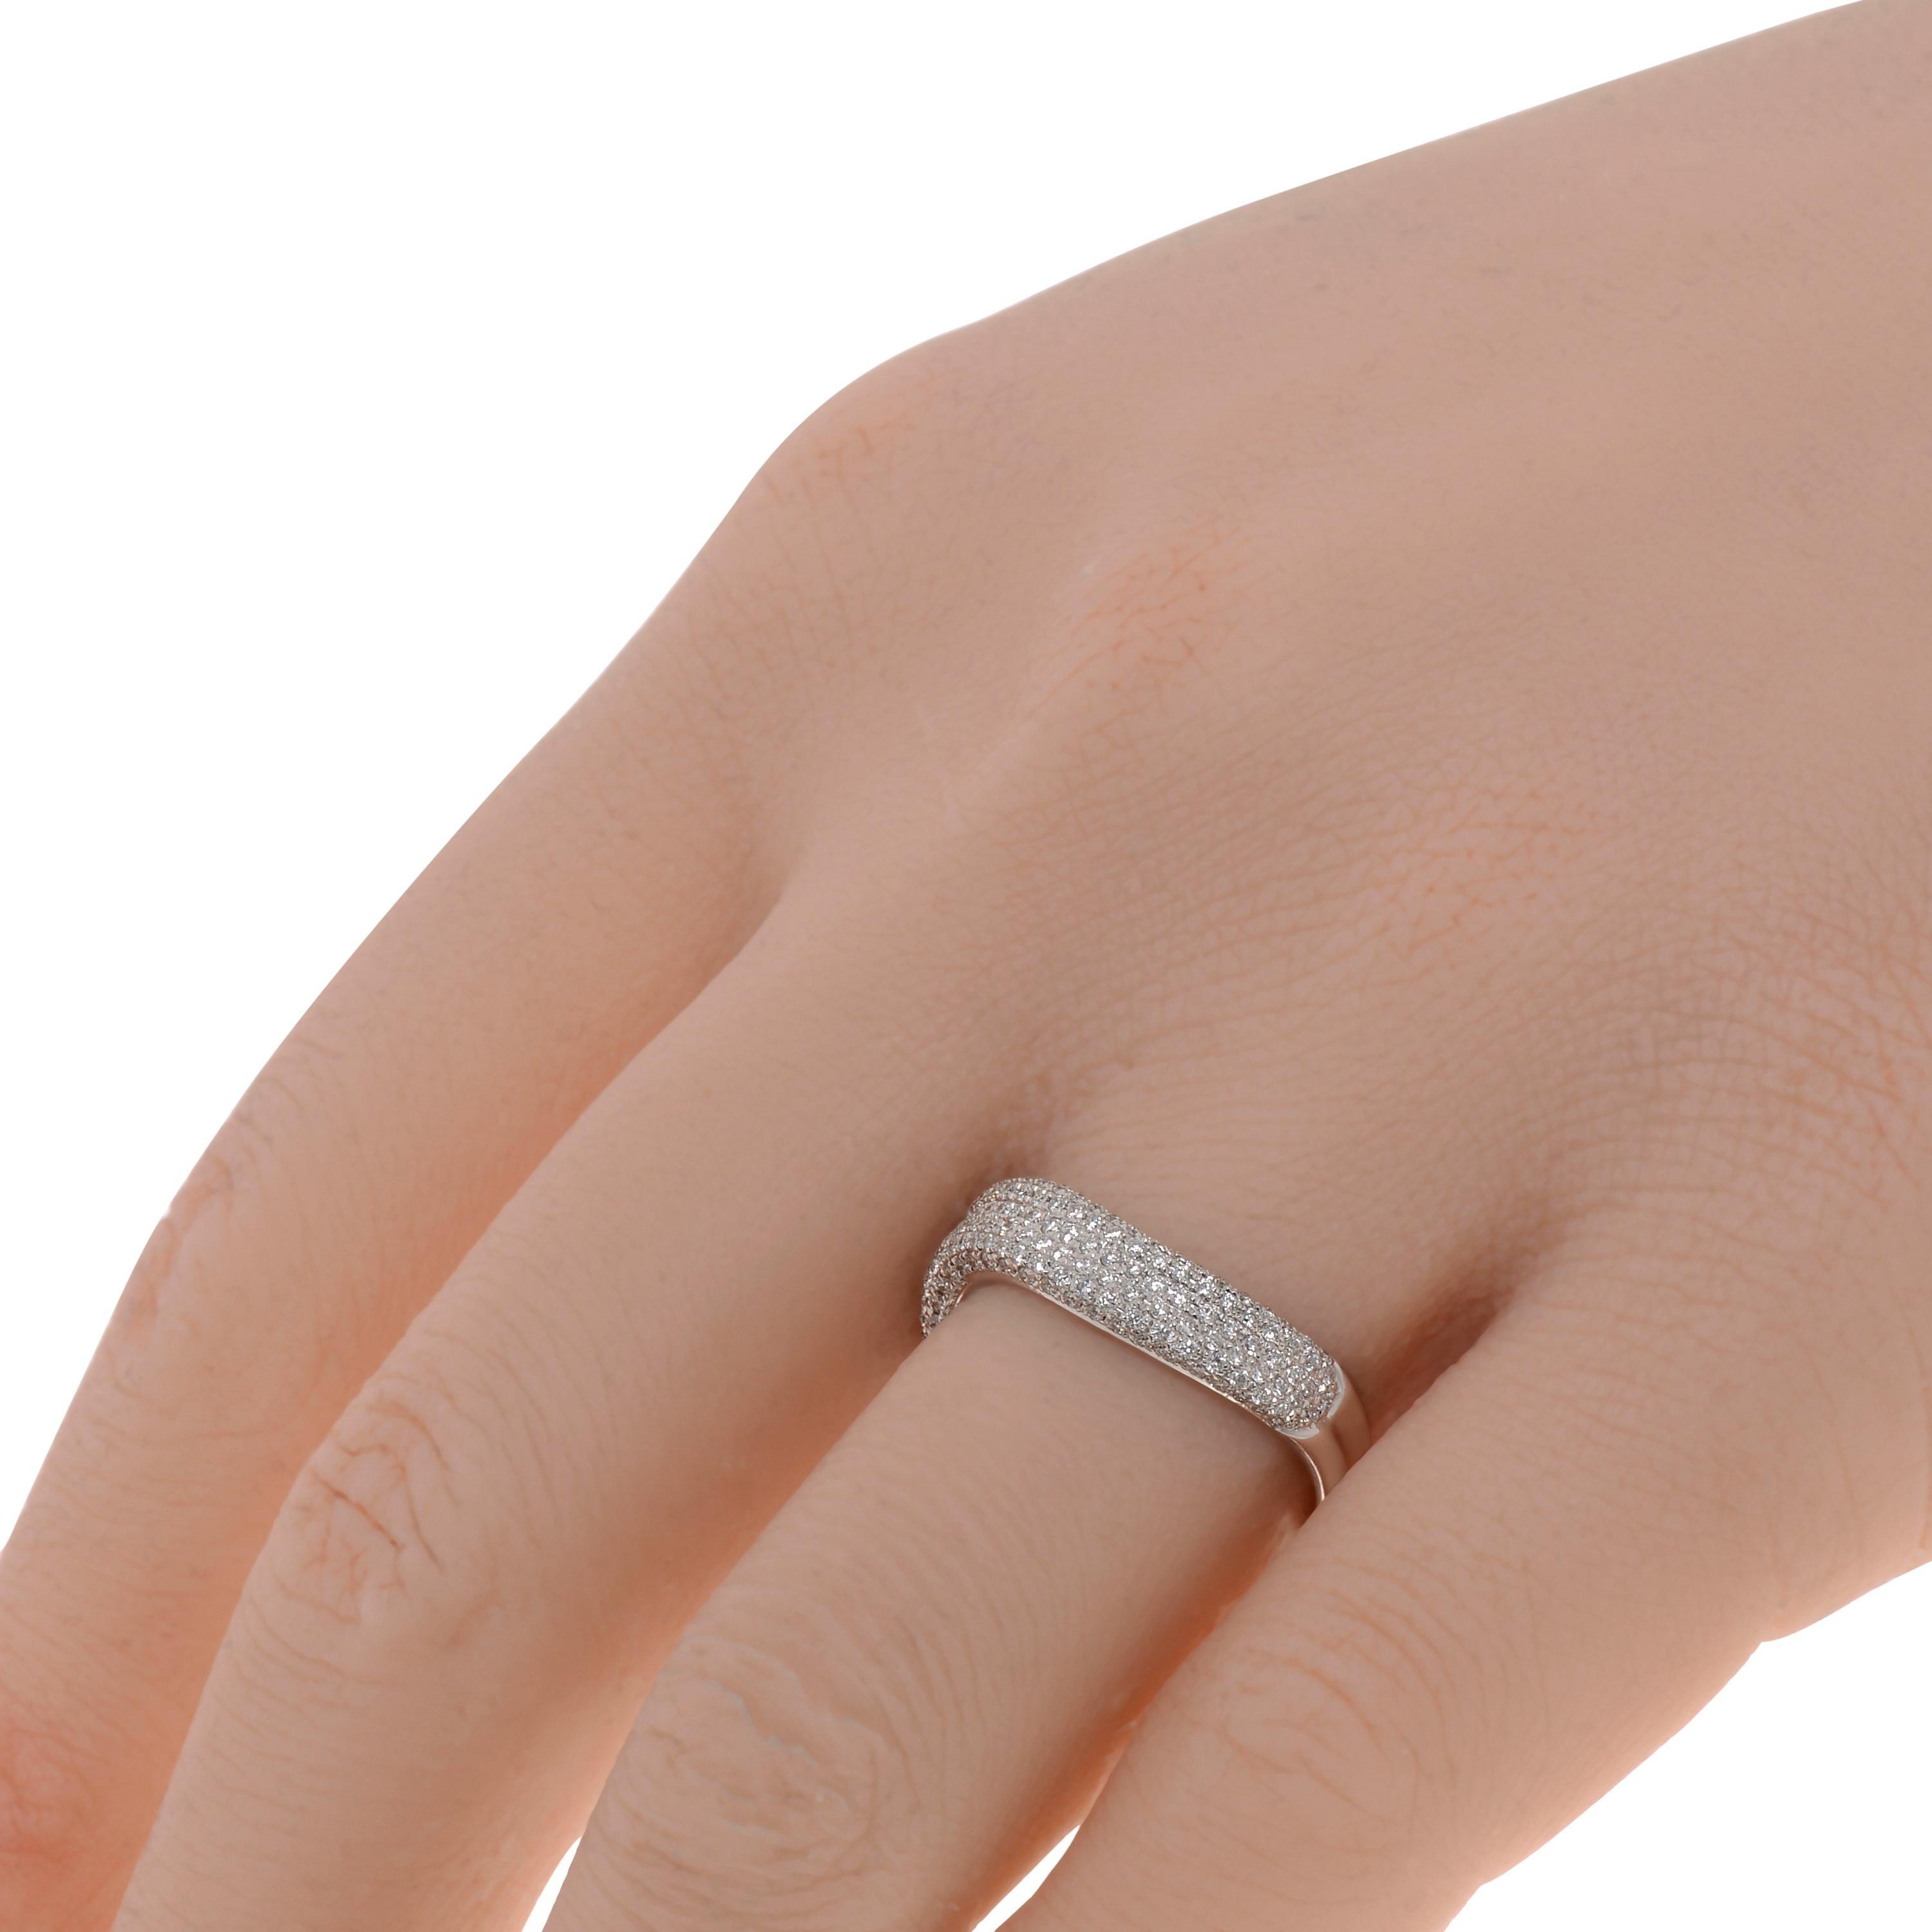 This contemporary Piero Milano 18K White Gold Curved Ring features layers of striking diamonds 0.6ct. tw. lining a curved white gold band. The ring size is 6.5 (53.1). The Band Width is 4.5mm. The Weight is 4.2g. Diamond Color: G-H. Diamond Clarity: